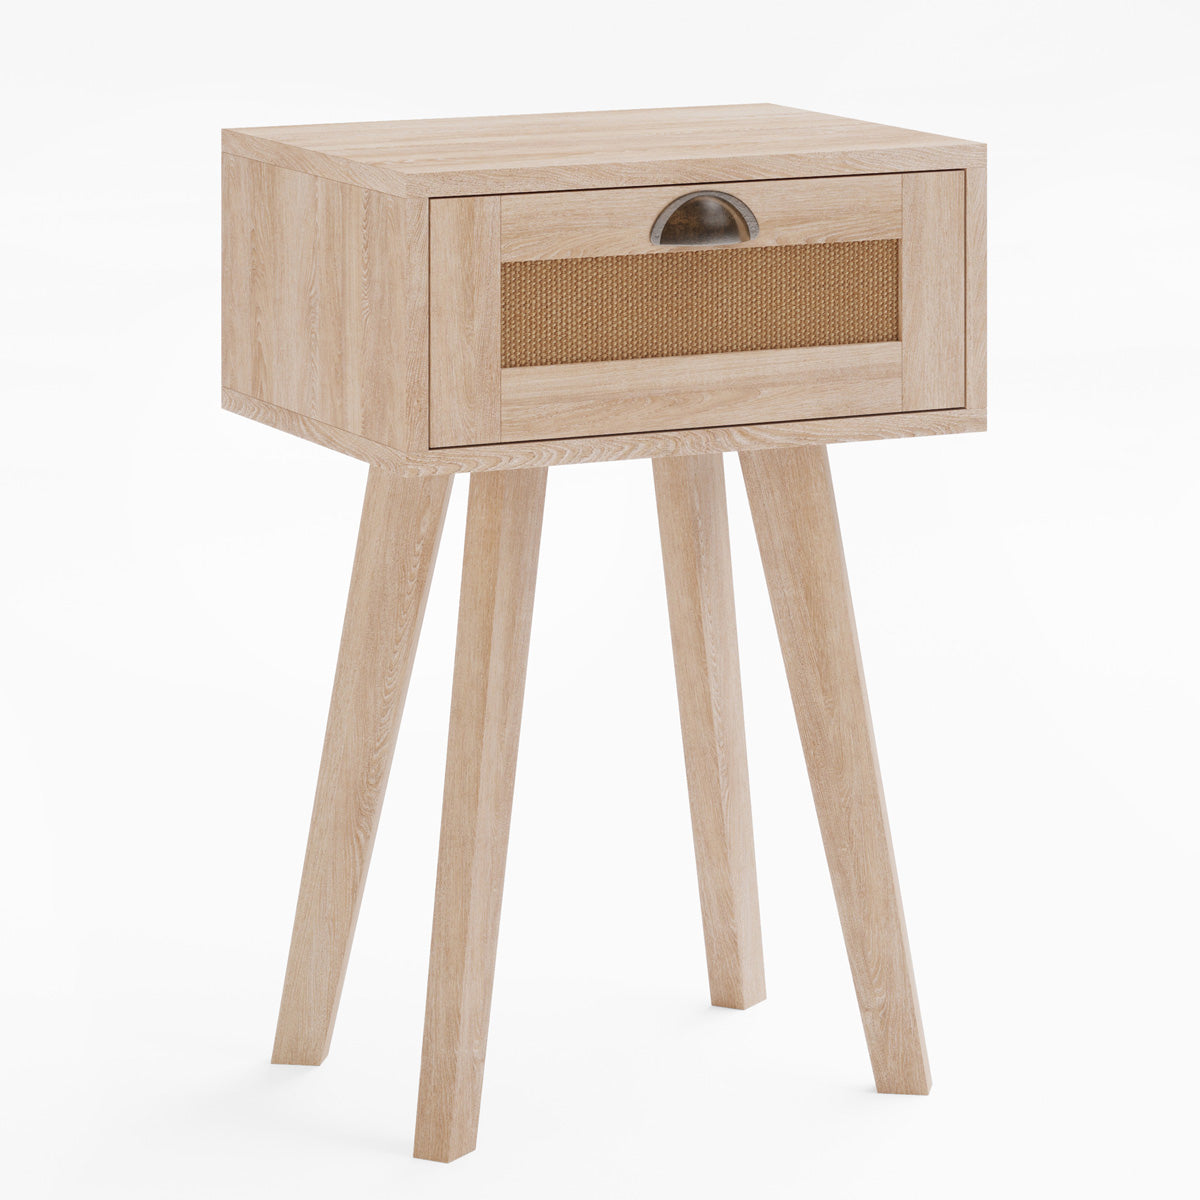 Rattan Cane Bedside Table (Cape Collection)